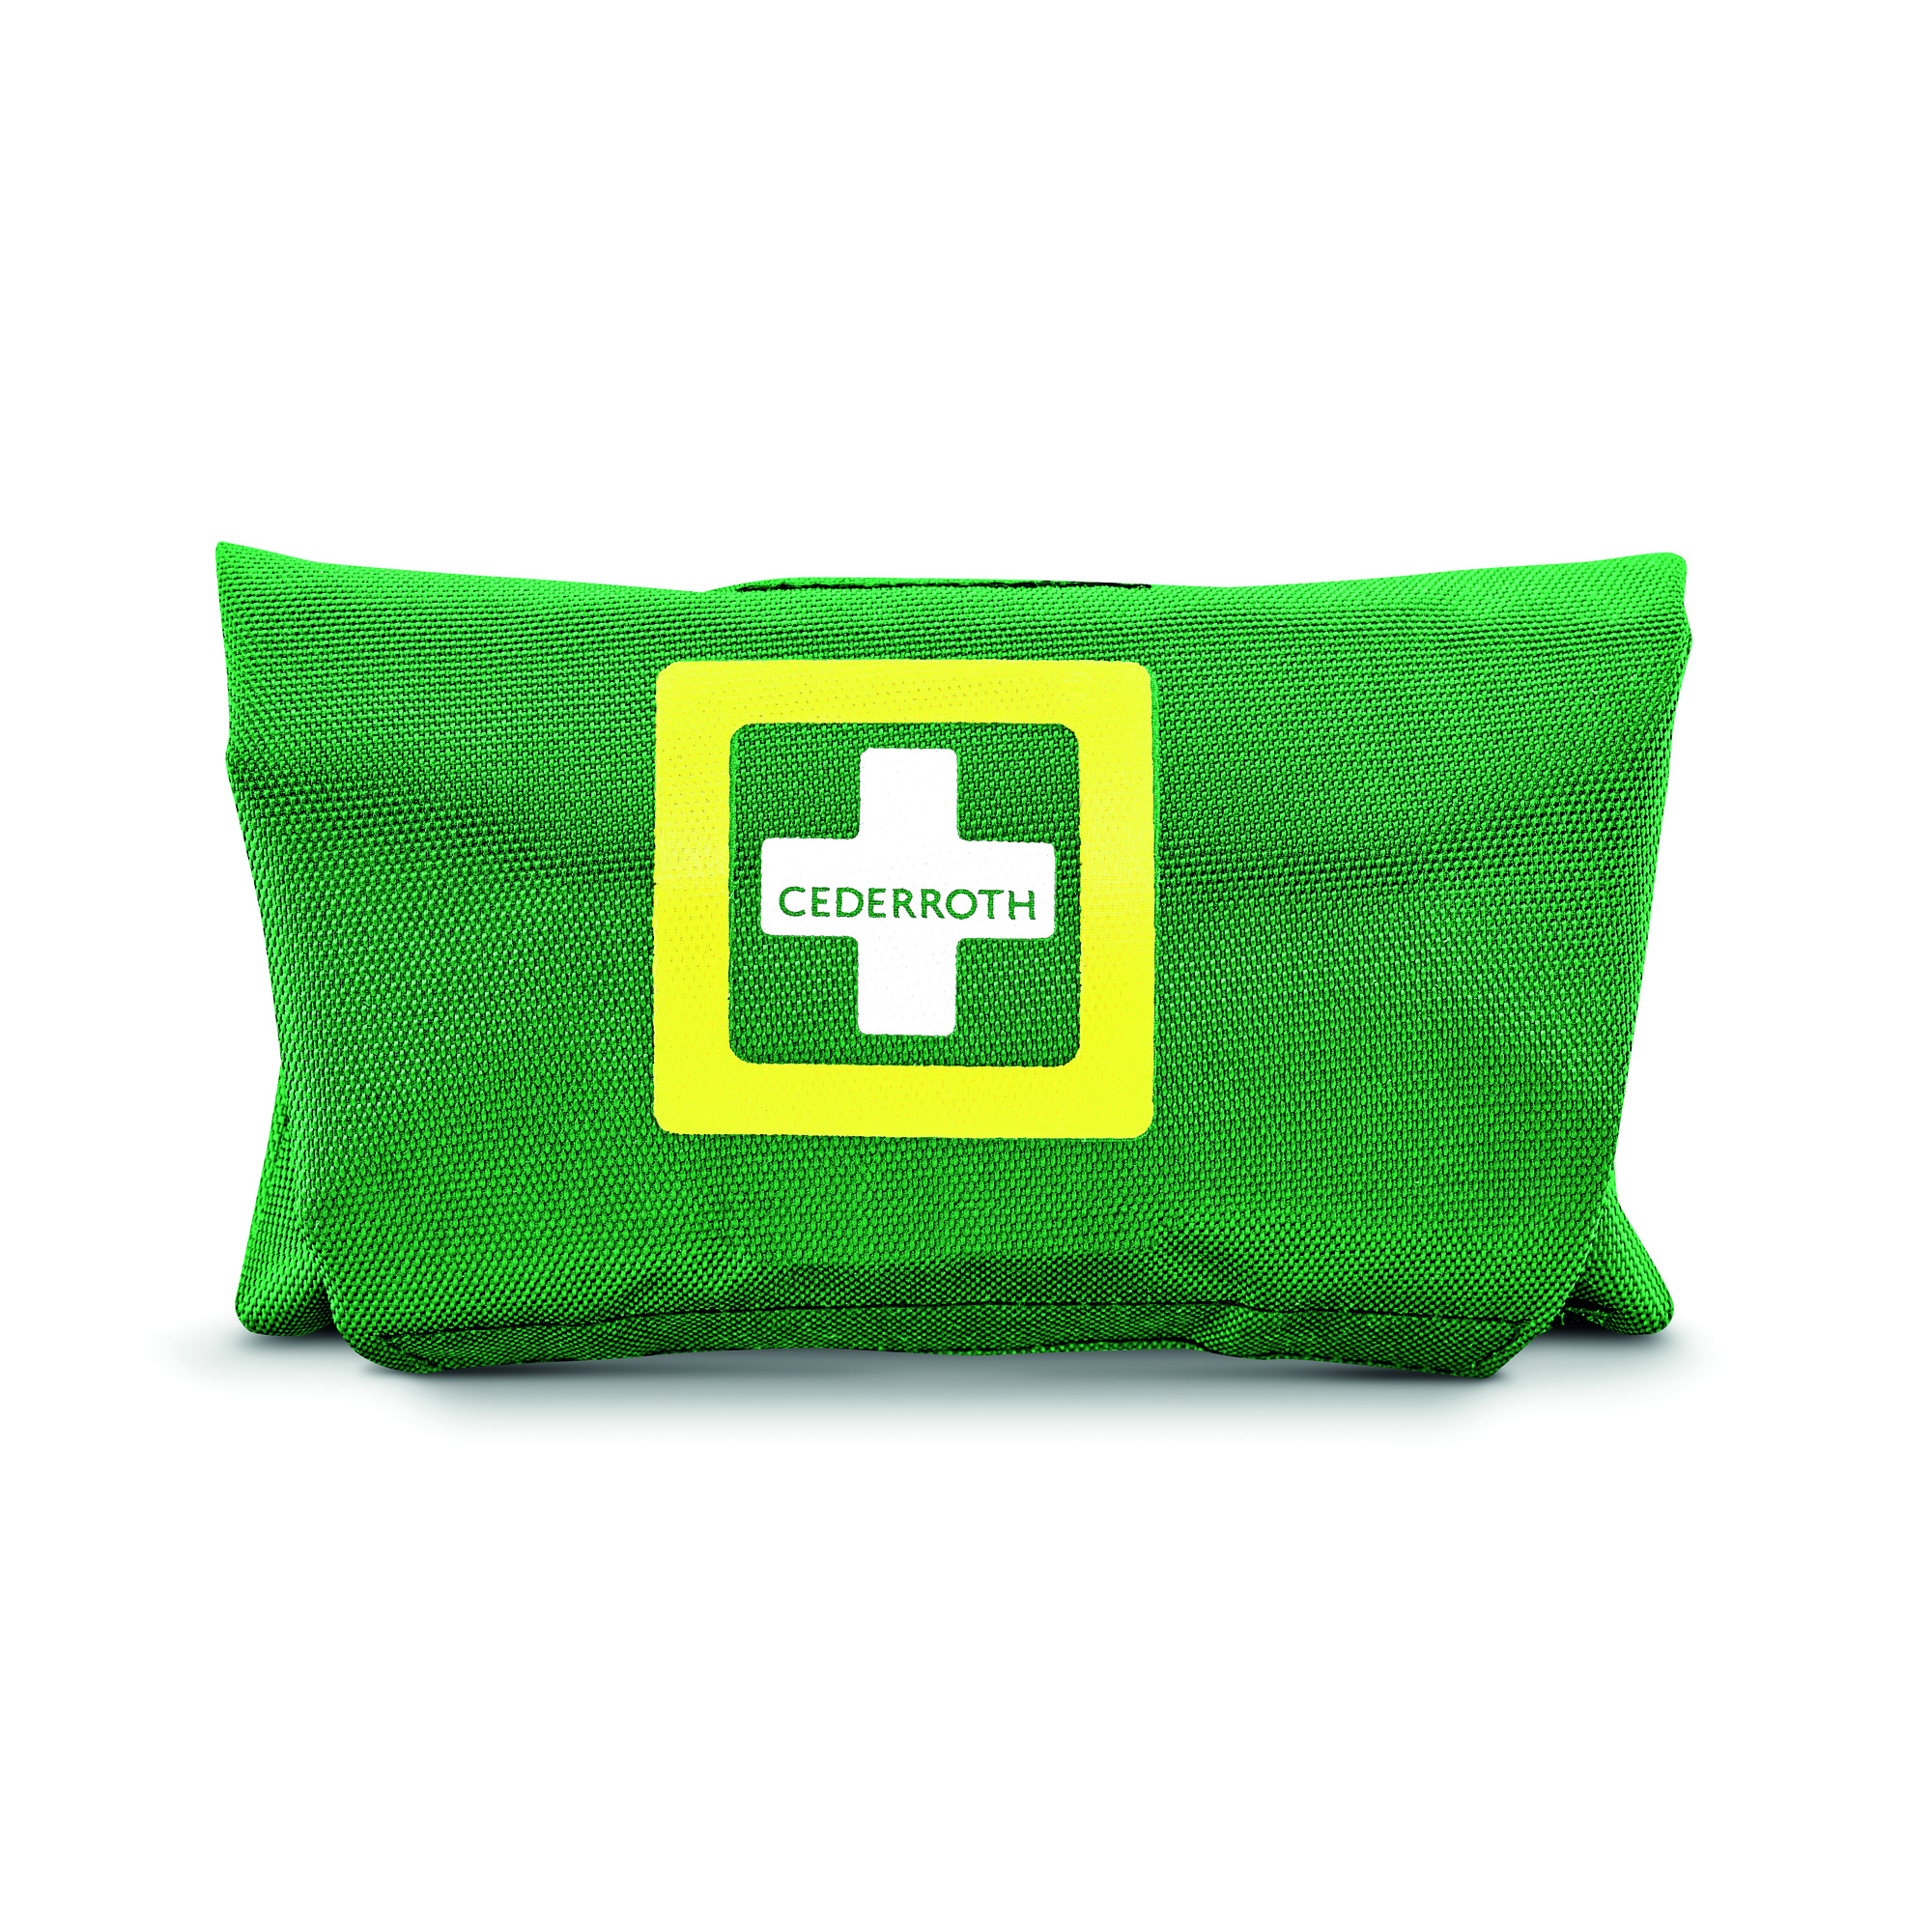 First Aid Kit, small